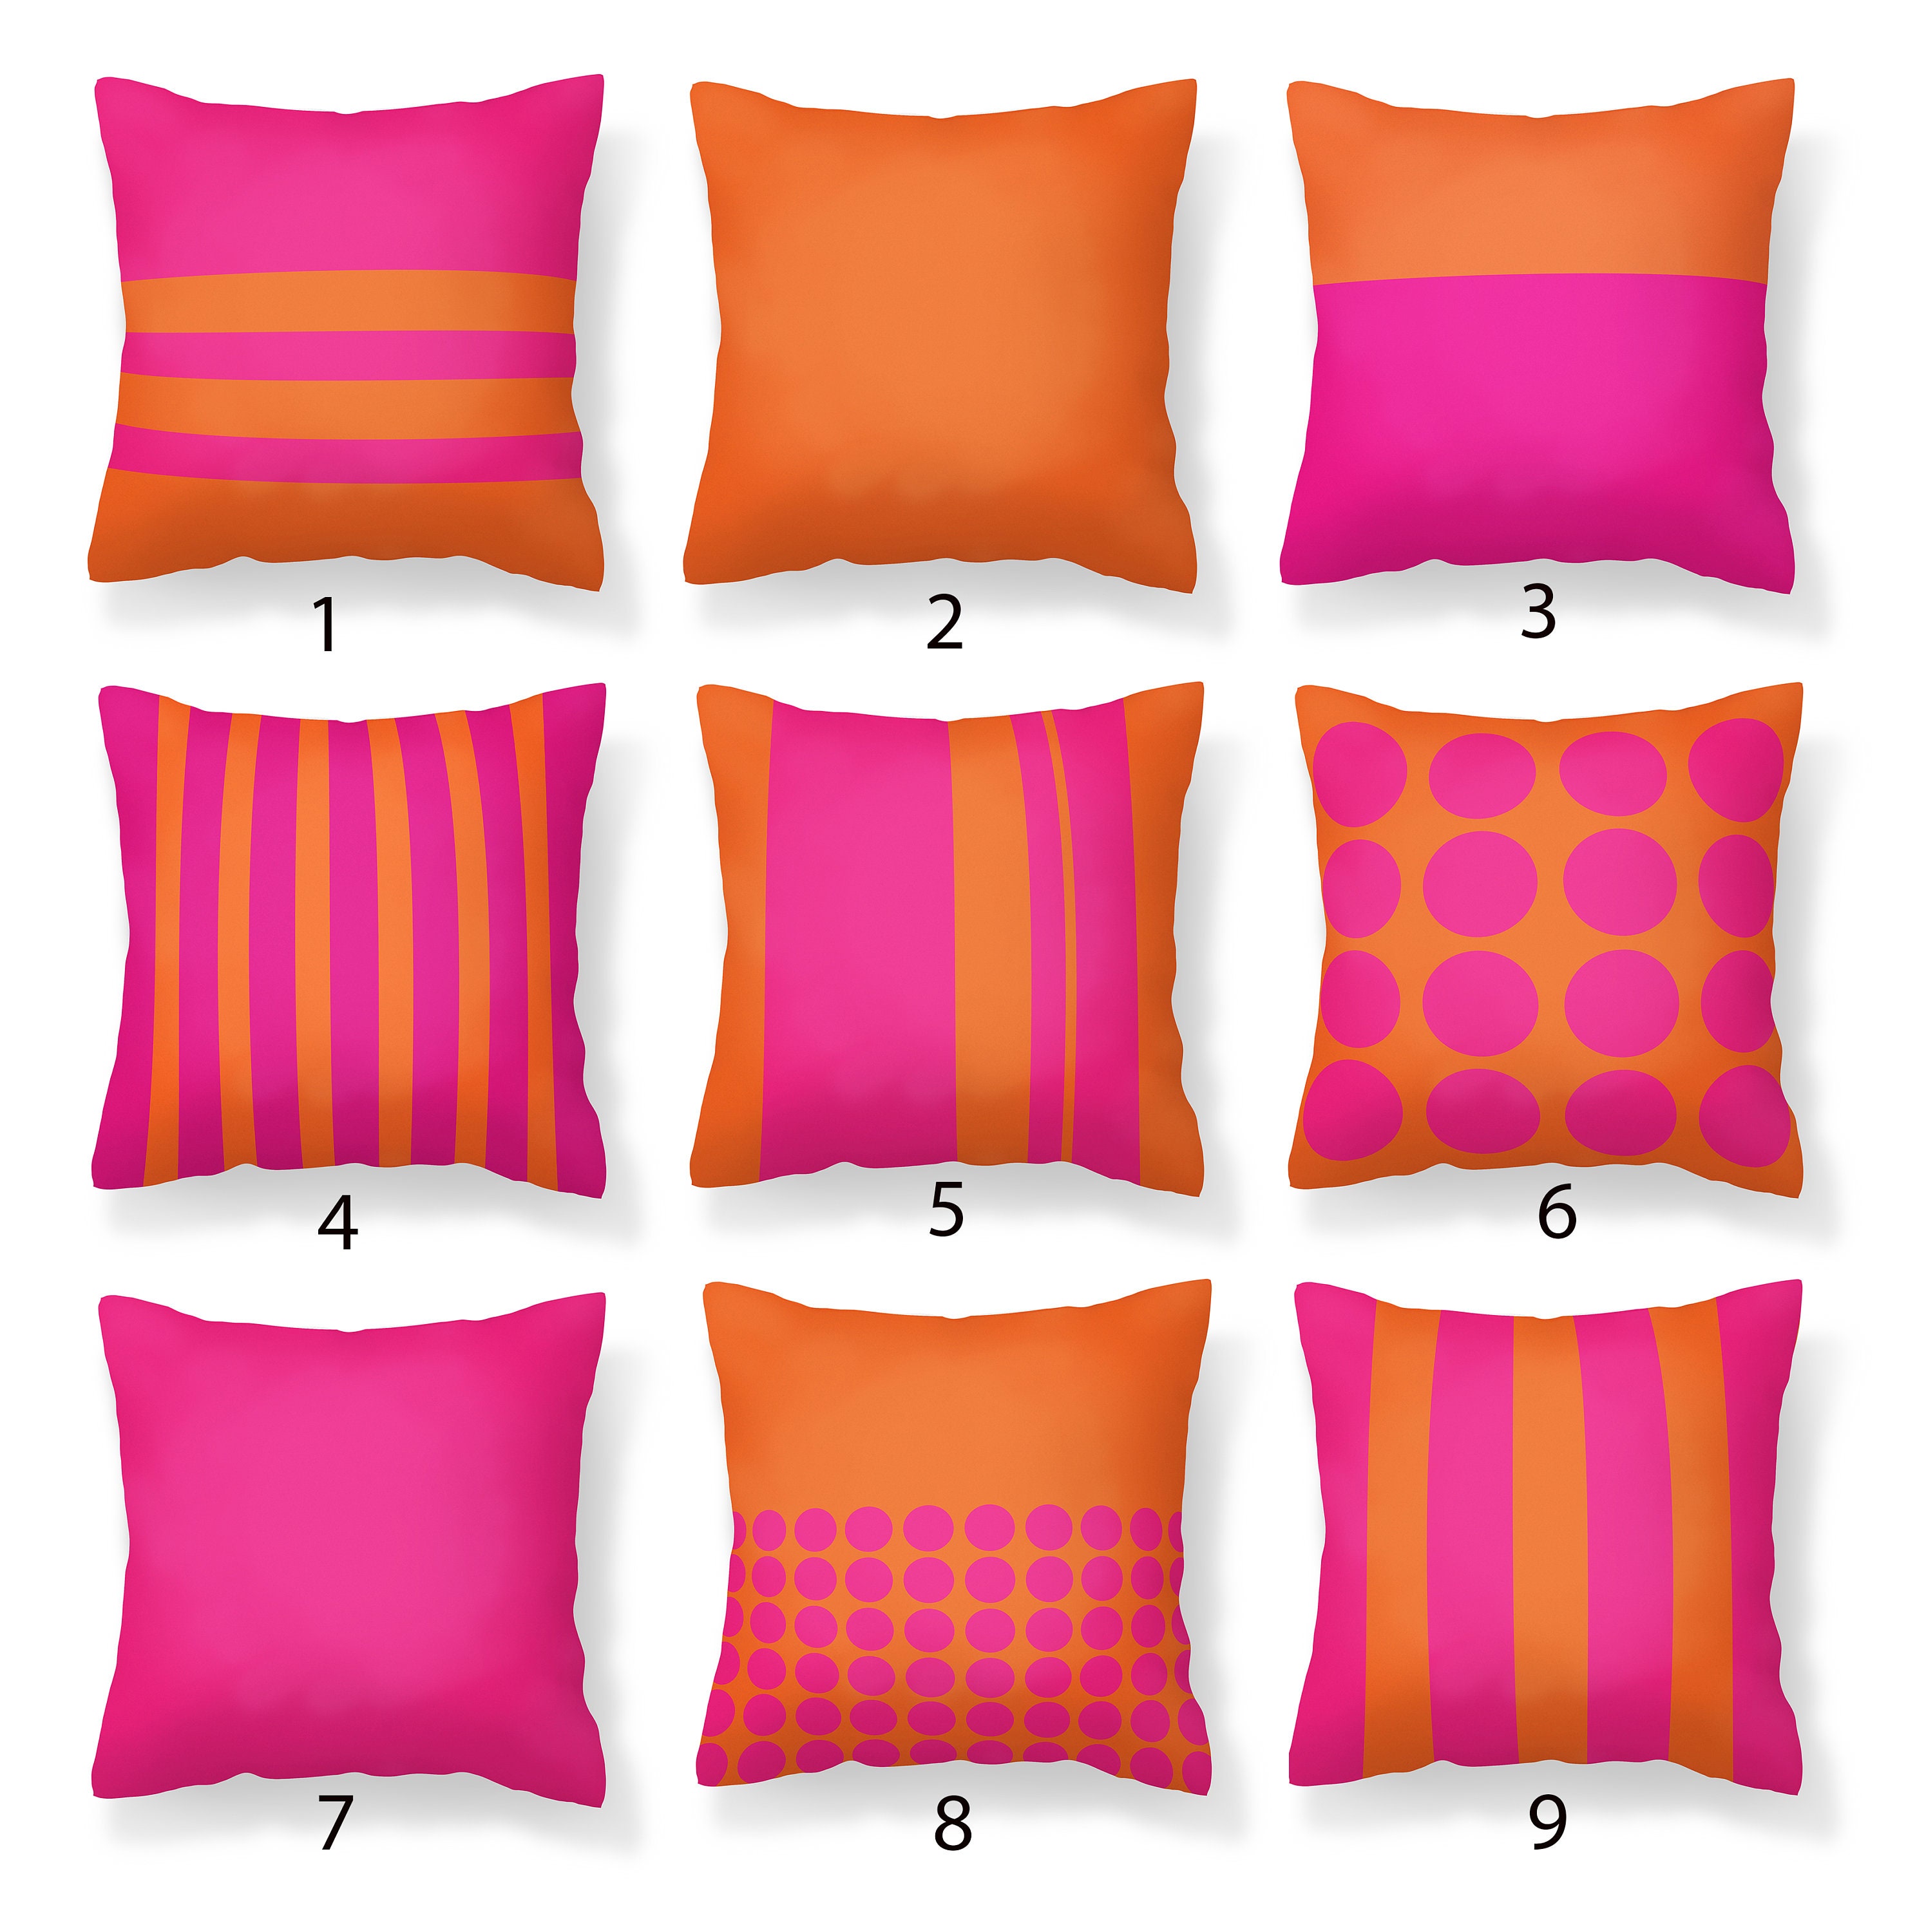 Gerich 18x18 inch Square Throw Pillow Covers with Stripes Decorative  Pillows for Living Room Couch Sofa, Orange, Set of 2